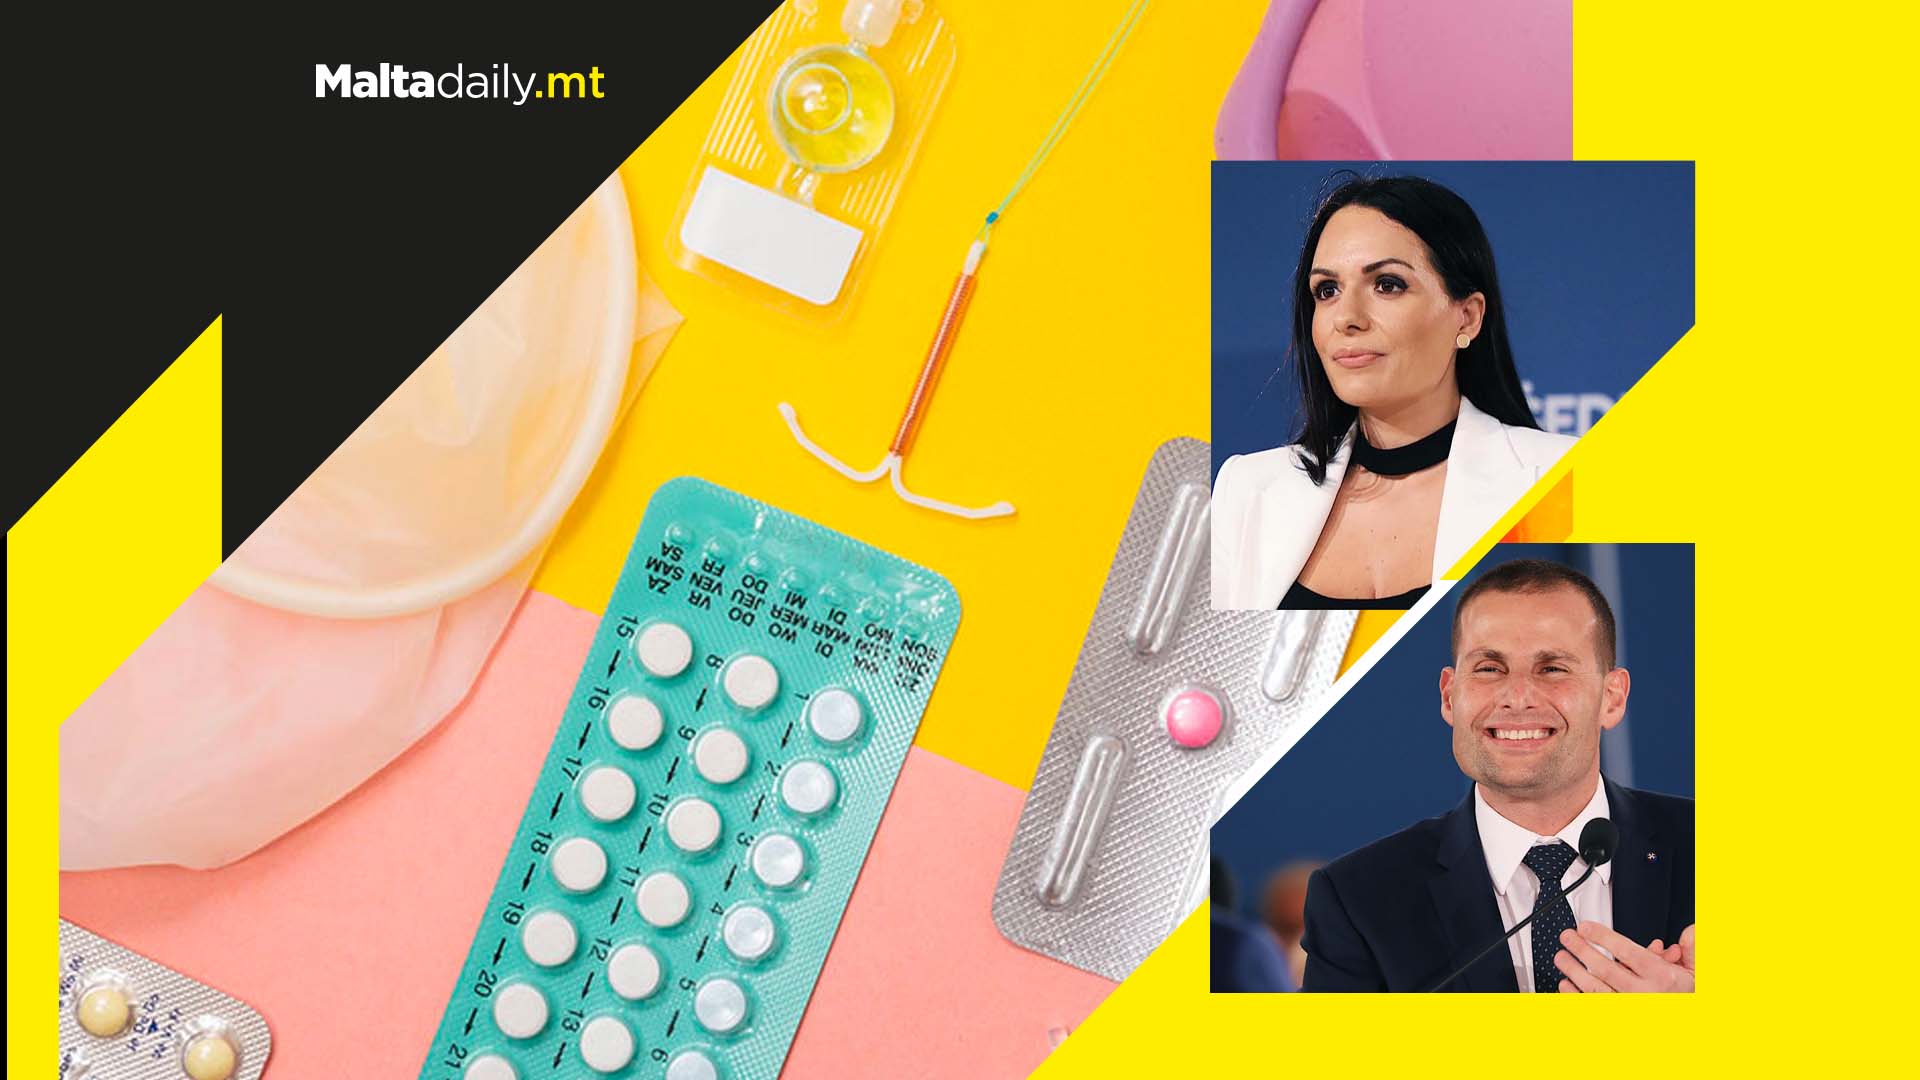 Free contraceptive and morning-after-pills pledged by Labour